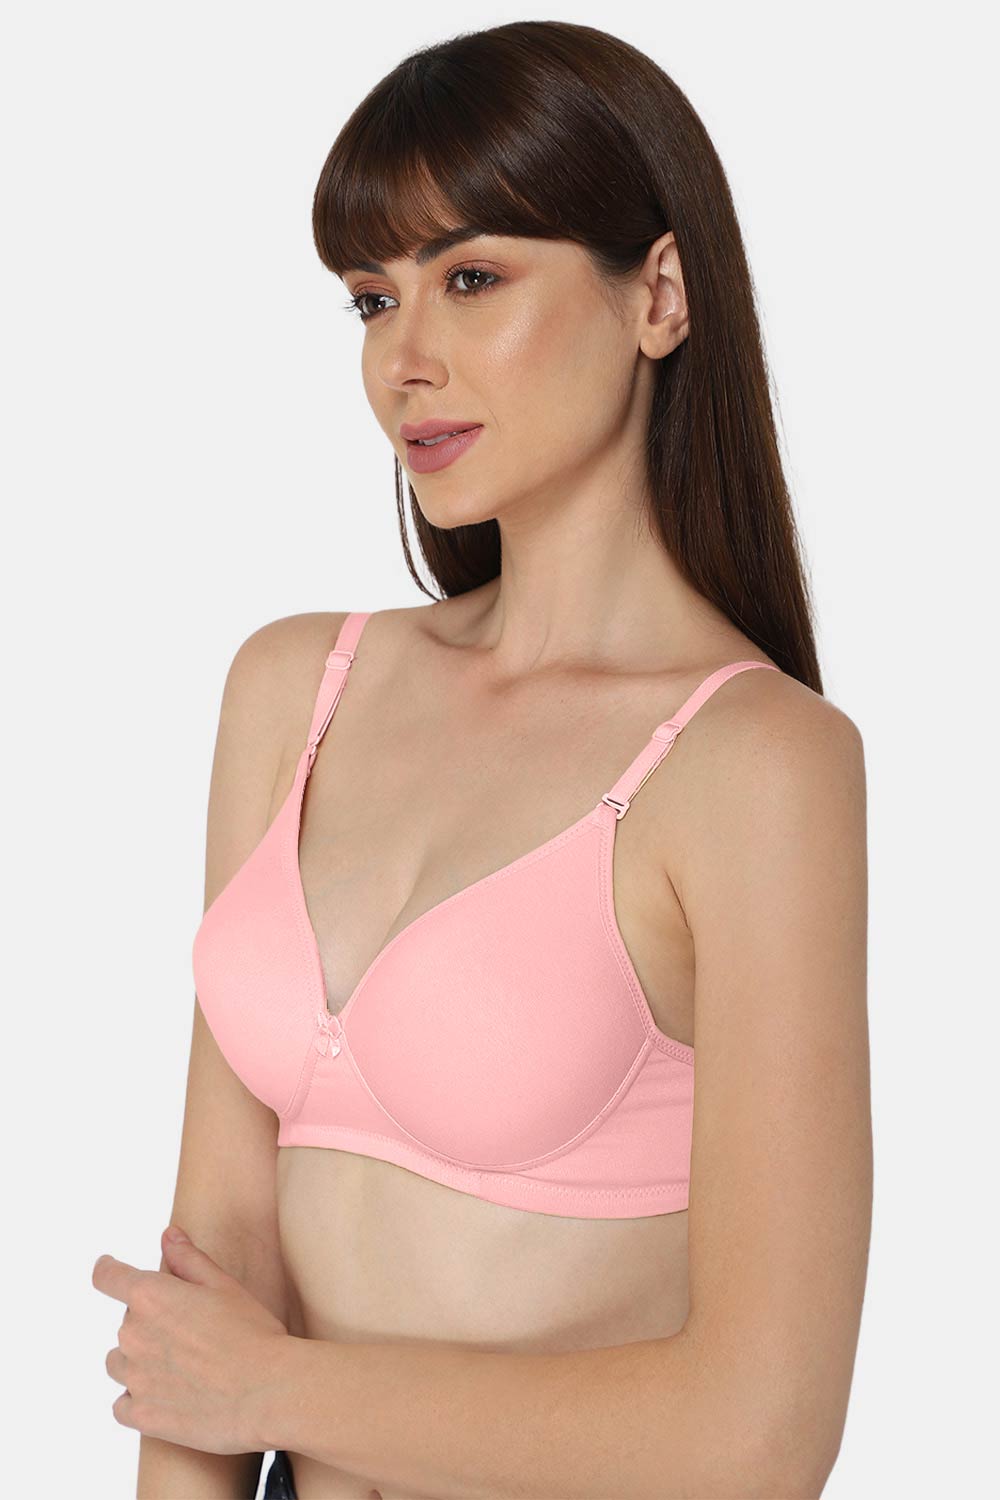 Studio Ninety ® ARL-21 Super Light Insert Pads Enhance Breast Cup Size  Cotton Cup Bra Pads Price in India - Buy Studio Ninety ® ARL-21 Super Light Insert  Pads Enhance Breast Cup